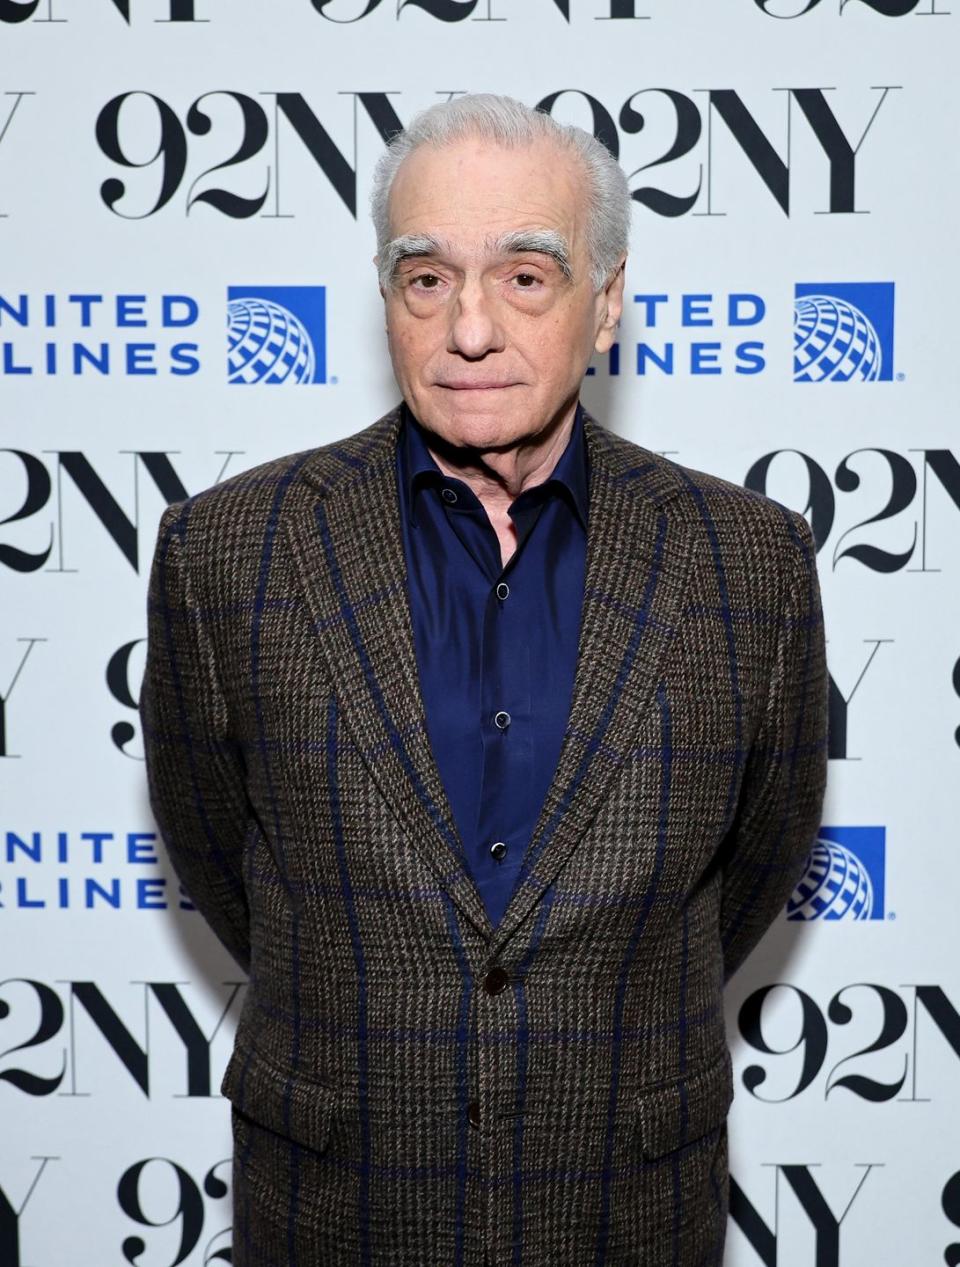 martin scorsese looks at the camera while standing in front of a white background with logos, he weras a brown and blue plaid suit jacket and a dark blue collared shirt